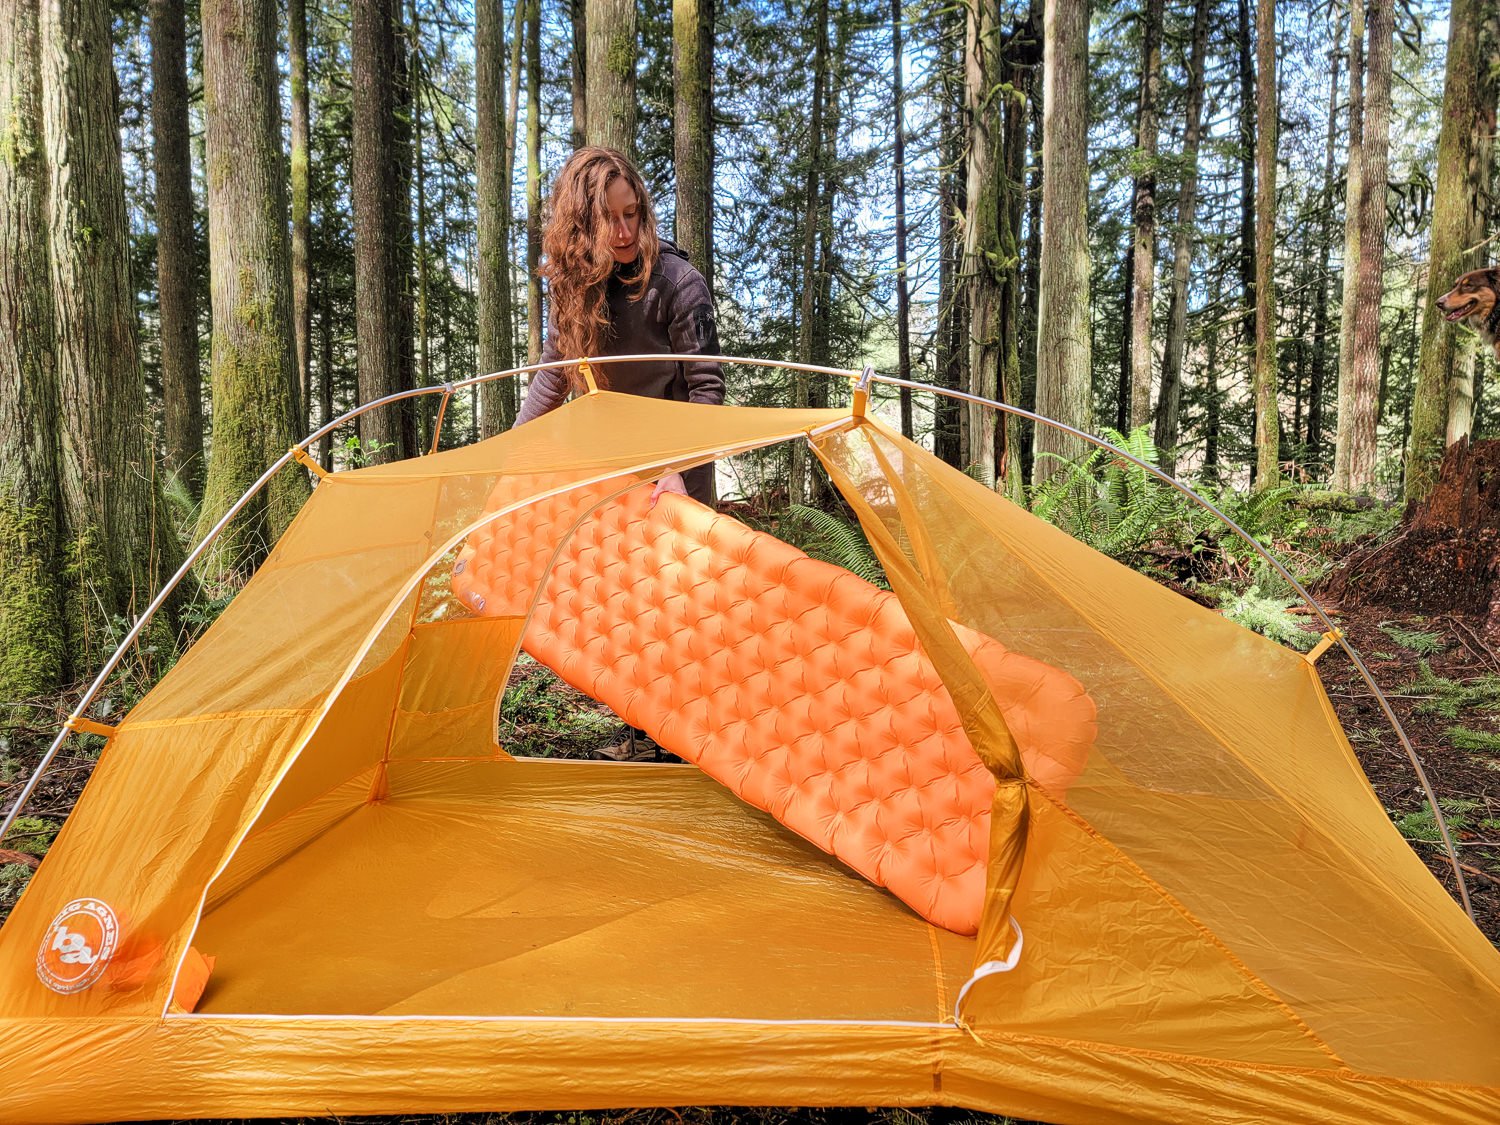 A hiker standing behind a tent putting a Big Agnes Zoom UL sleeping pad inside